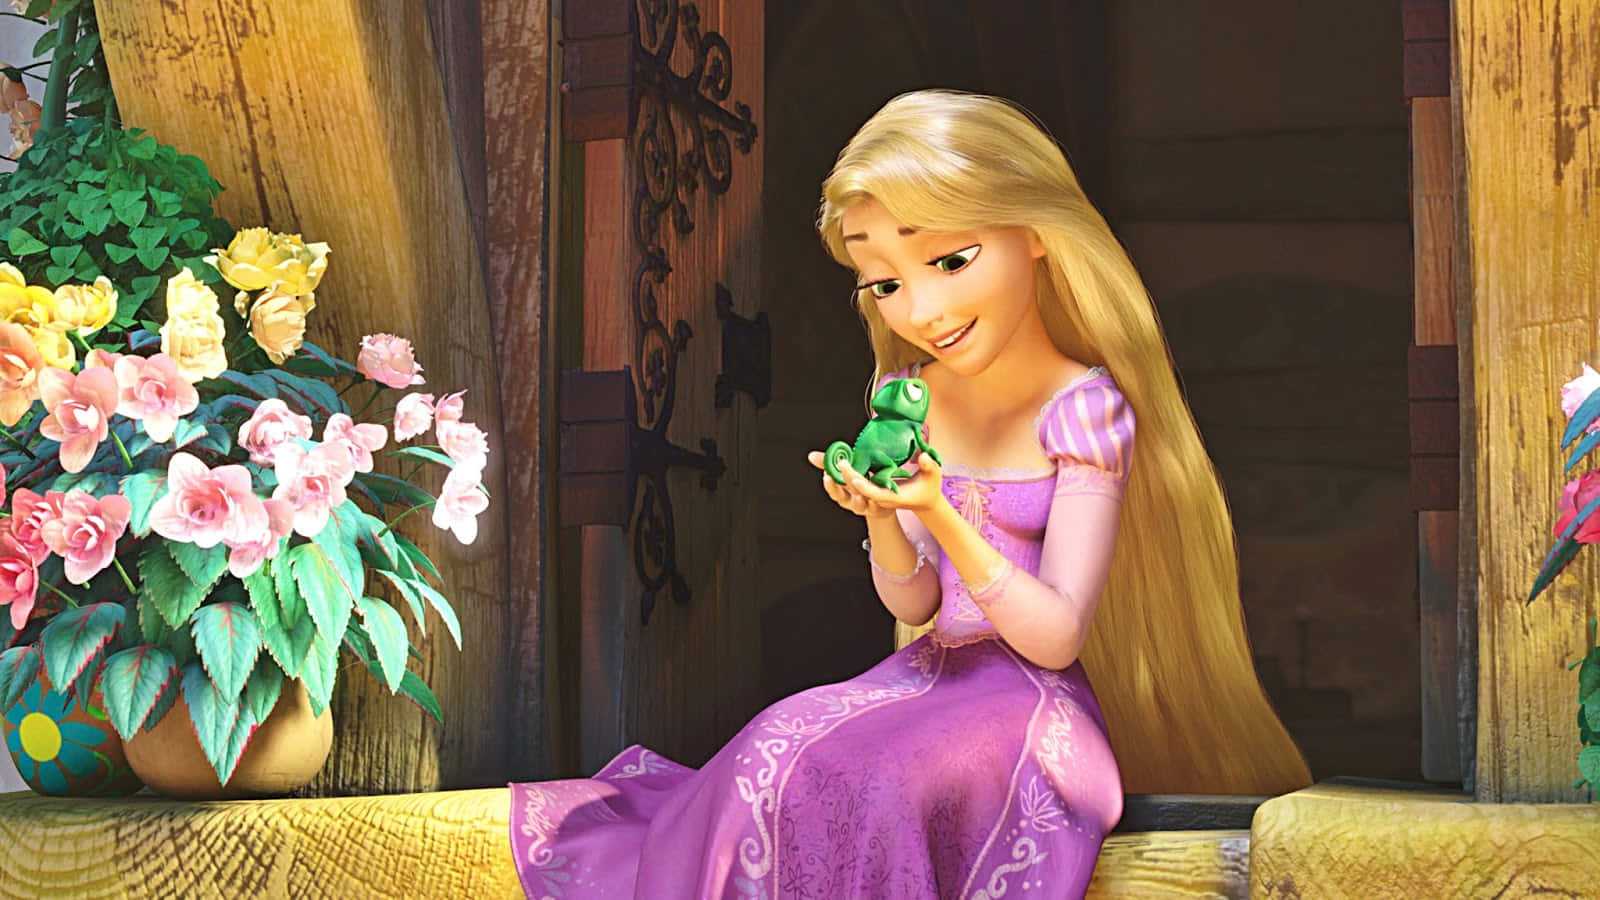 A scene from the celebrated film Rapunzel